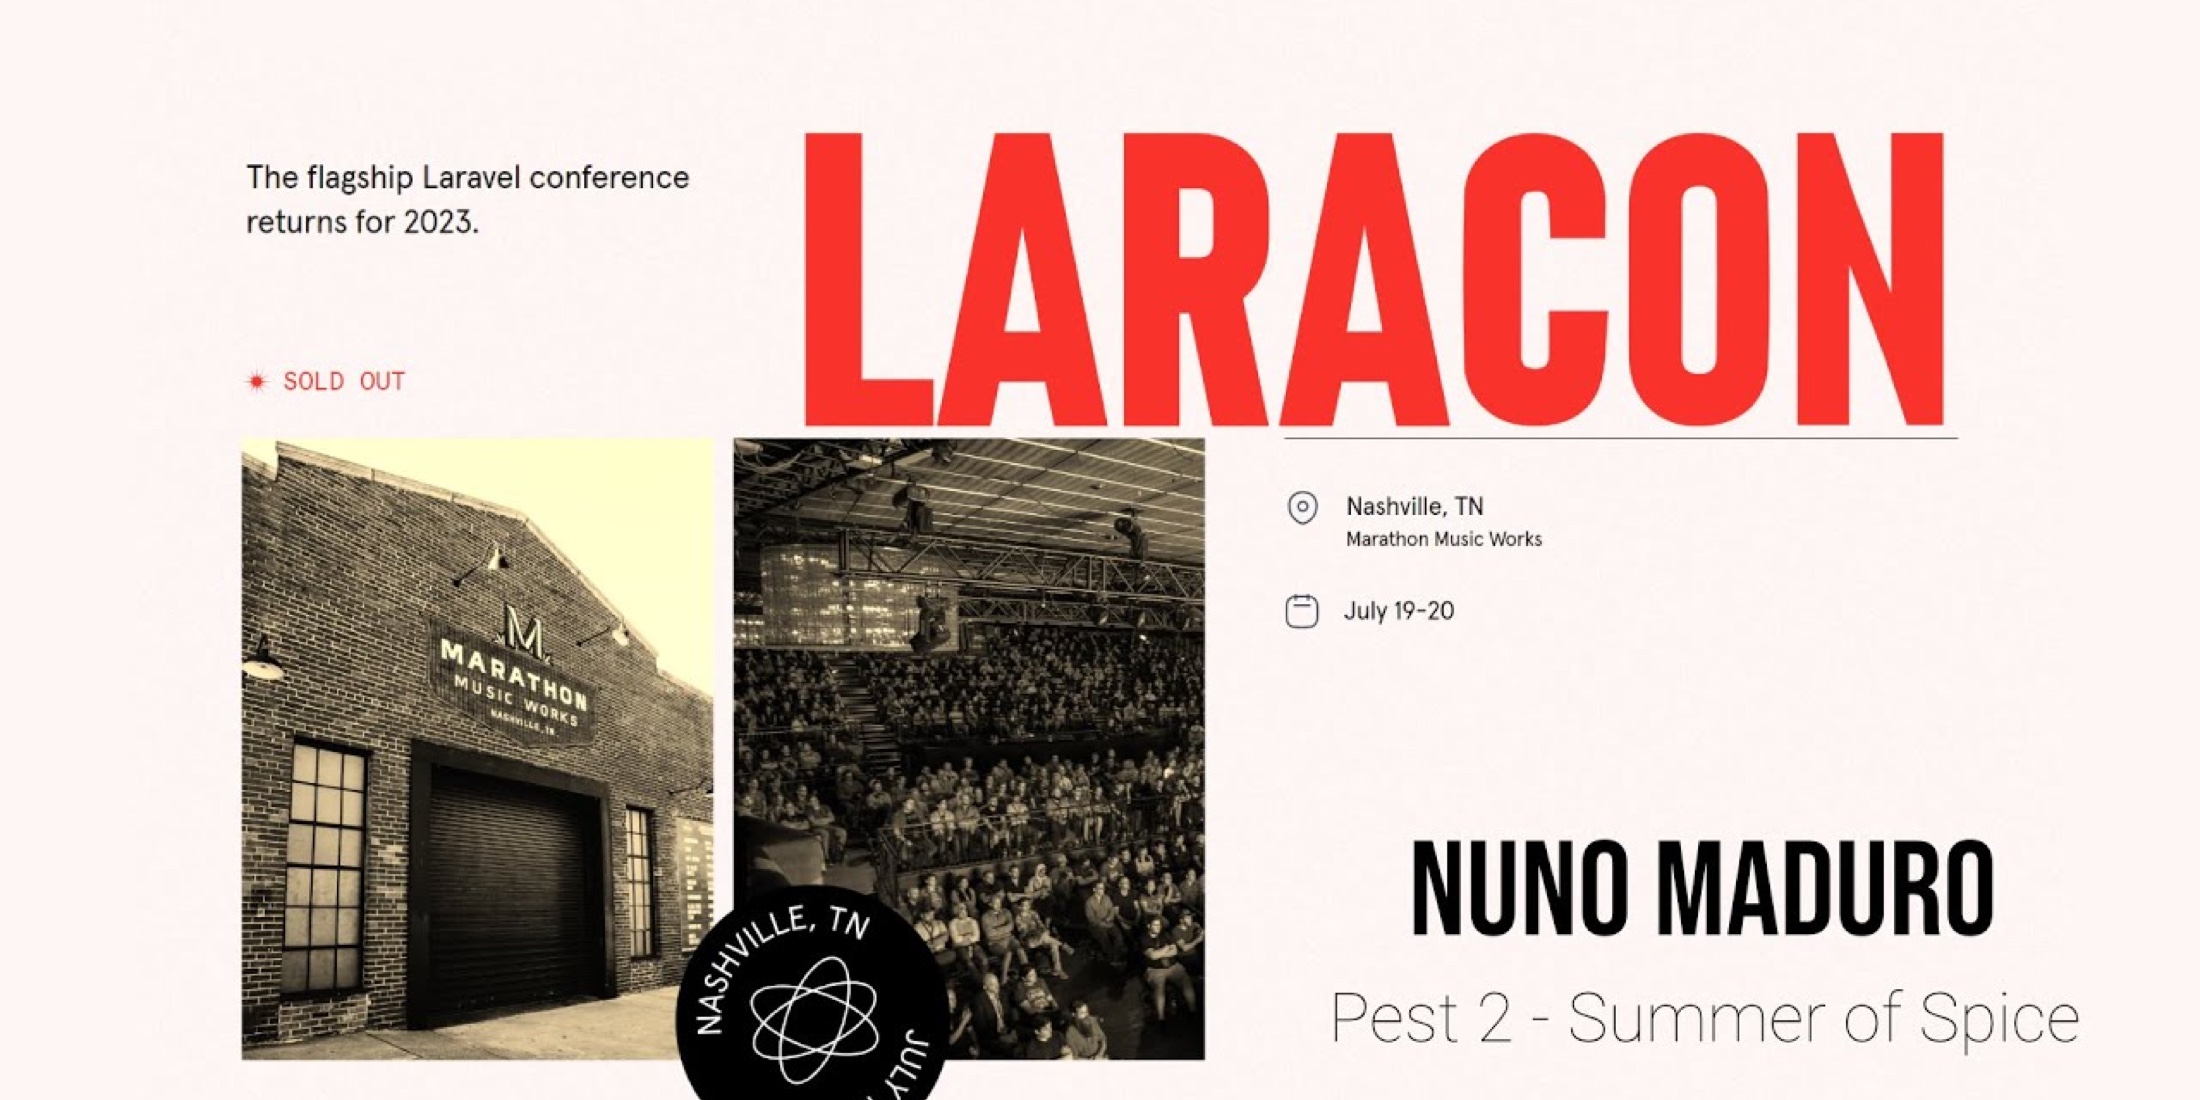 Watch Nuno Maduro's  "Pest 2 - Summer of Spice" from Laracon image